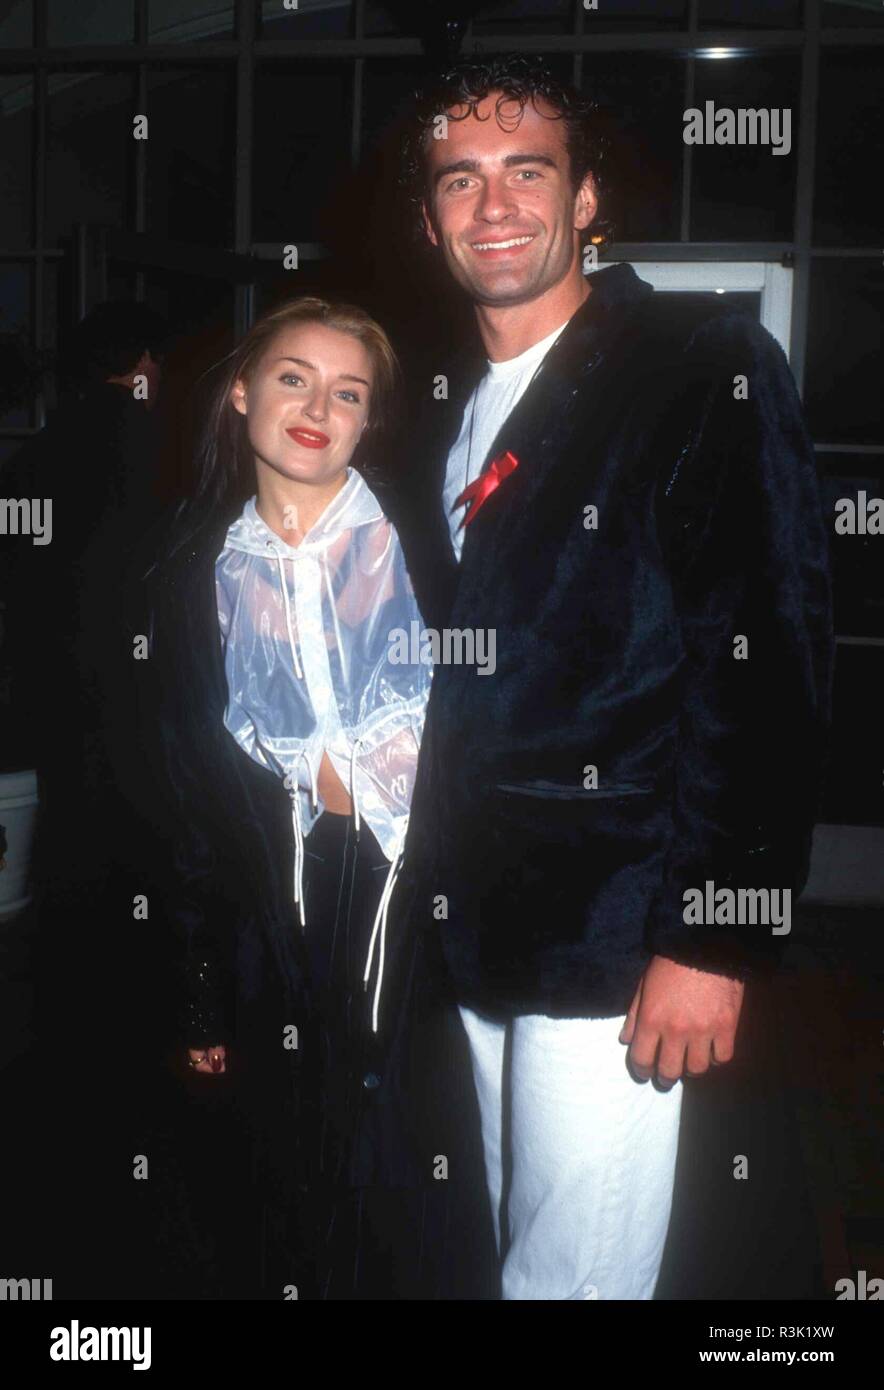 HOLLYWOOD, CA - FEBRUARY 10: Singer Dannii Minogue and actor Julian McMahon attend 'Strictly Ballroom' Premiere on February 10, 1993 at the Galaxy Theatre in Hollywood, California. Photo by Barry King/Alamy Stock Photo Stock Photo